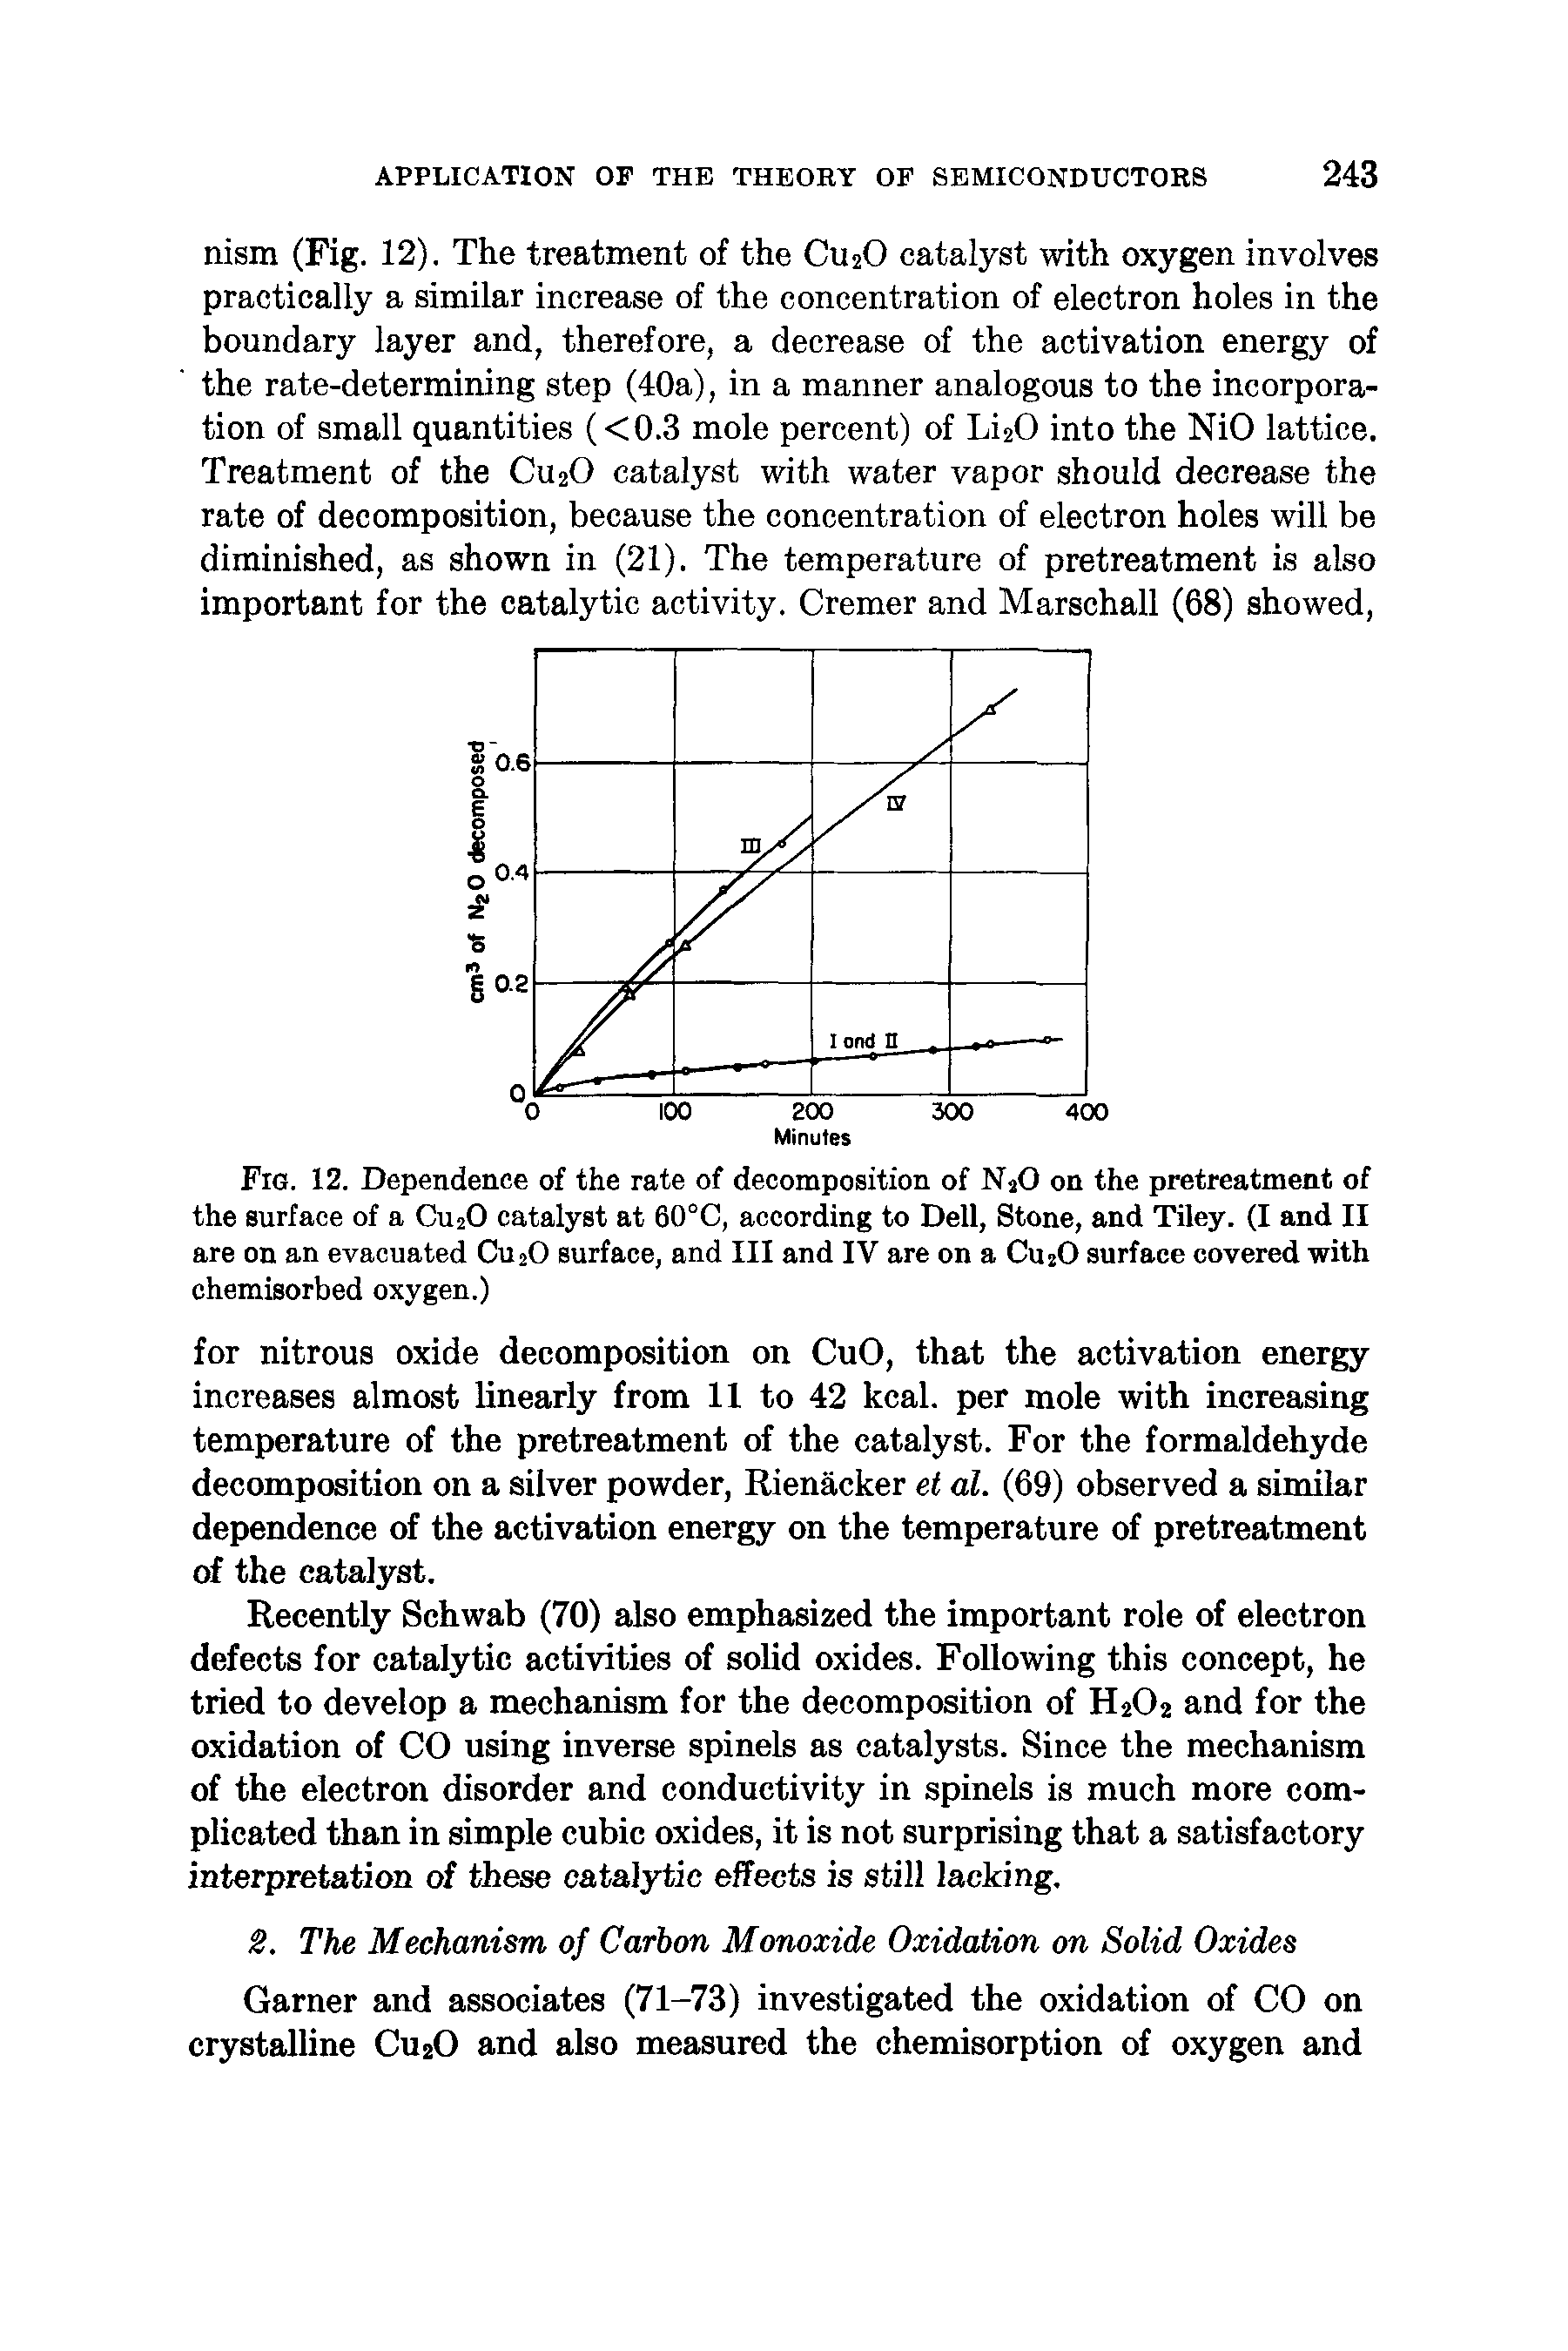 Fig. 12. Dependence of the rate of decomposition of NjO on the pretreatment of the surface of a CU2O catalyst at 6()°C, according to Dell, Stone, and Tiley. (I and II are on an evacuated CujO surface, and III and IV are on a CuzO surface covered with chemisorbed oxygen.)...